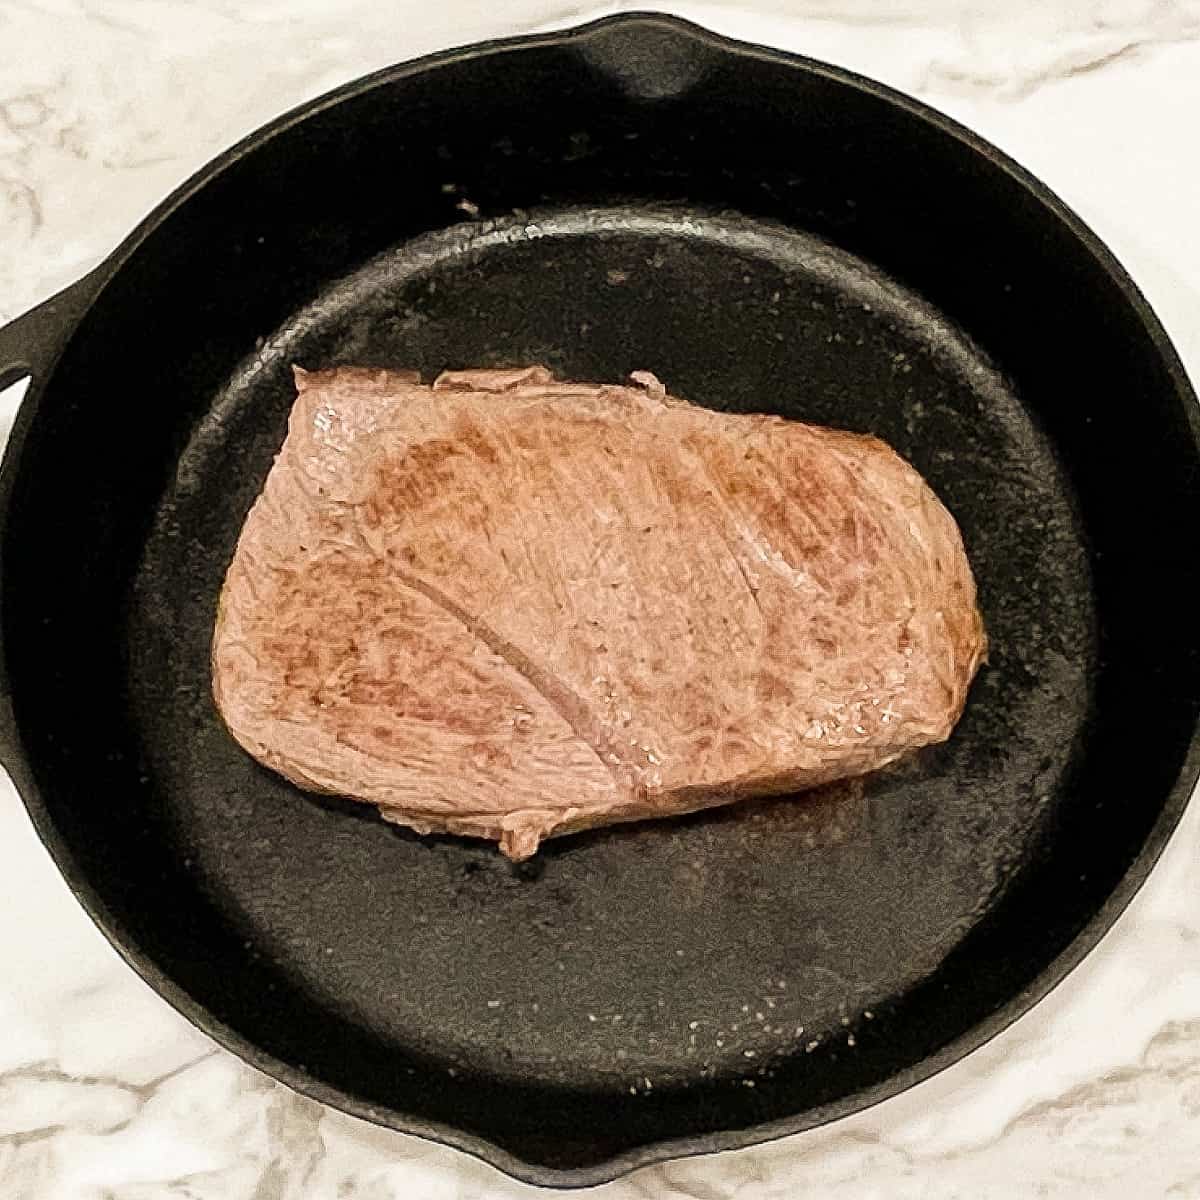 slow cooker london broil sear the meat